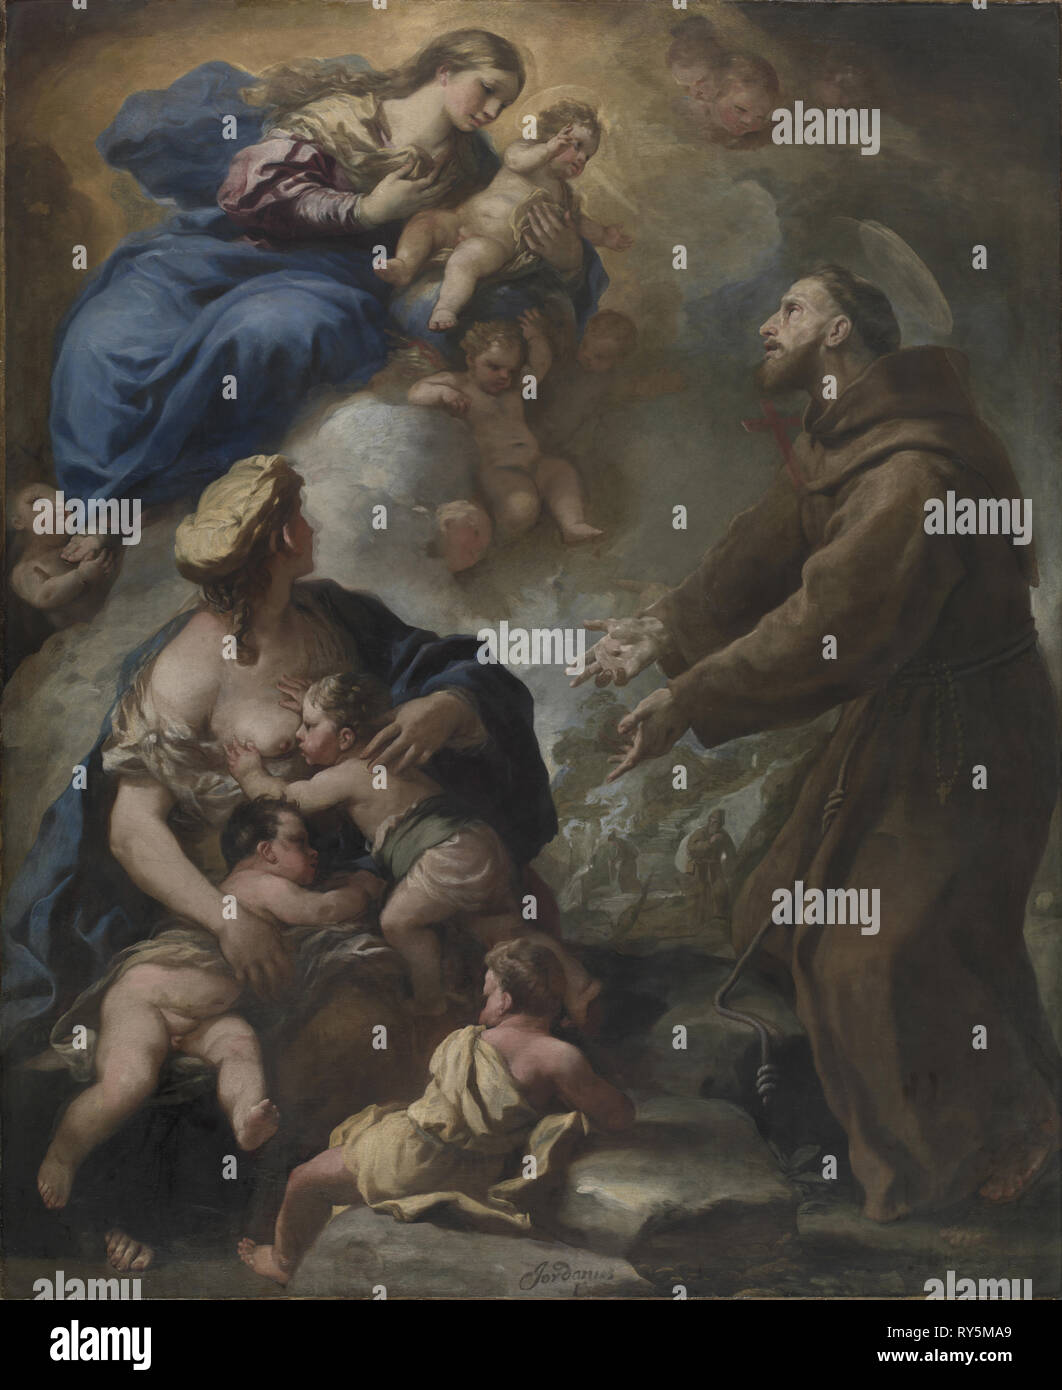 The Virgin and Child Appearing to Saint Francis of Assisi, 1680s. Luca Giordano (Italian, 1634-1705). Oil on canvas; framed: 273 x 229 x 10 cm (107 1/2 x 90 3/16 x 3 15/16 in.); unframed: 239.4 x 195.7 cm (94 1/4 x 77 1/16 in Stock Photo